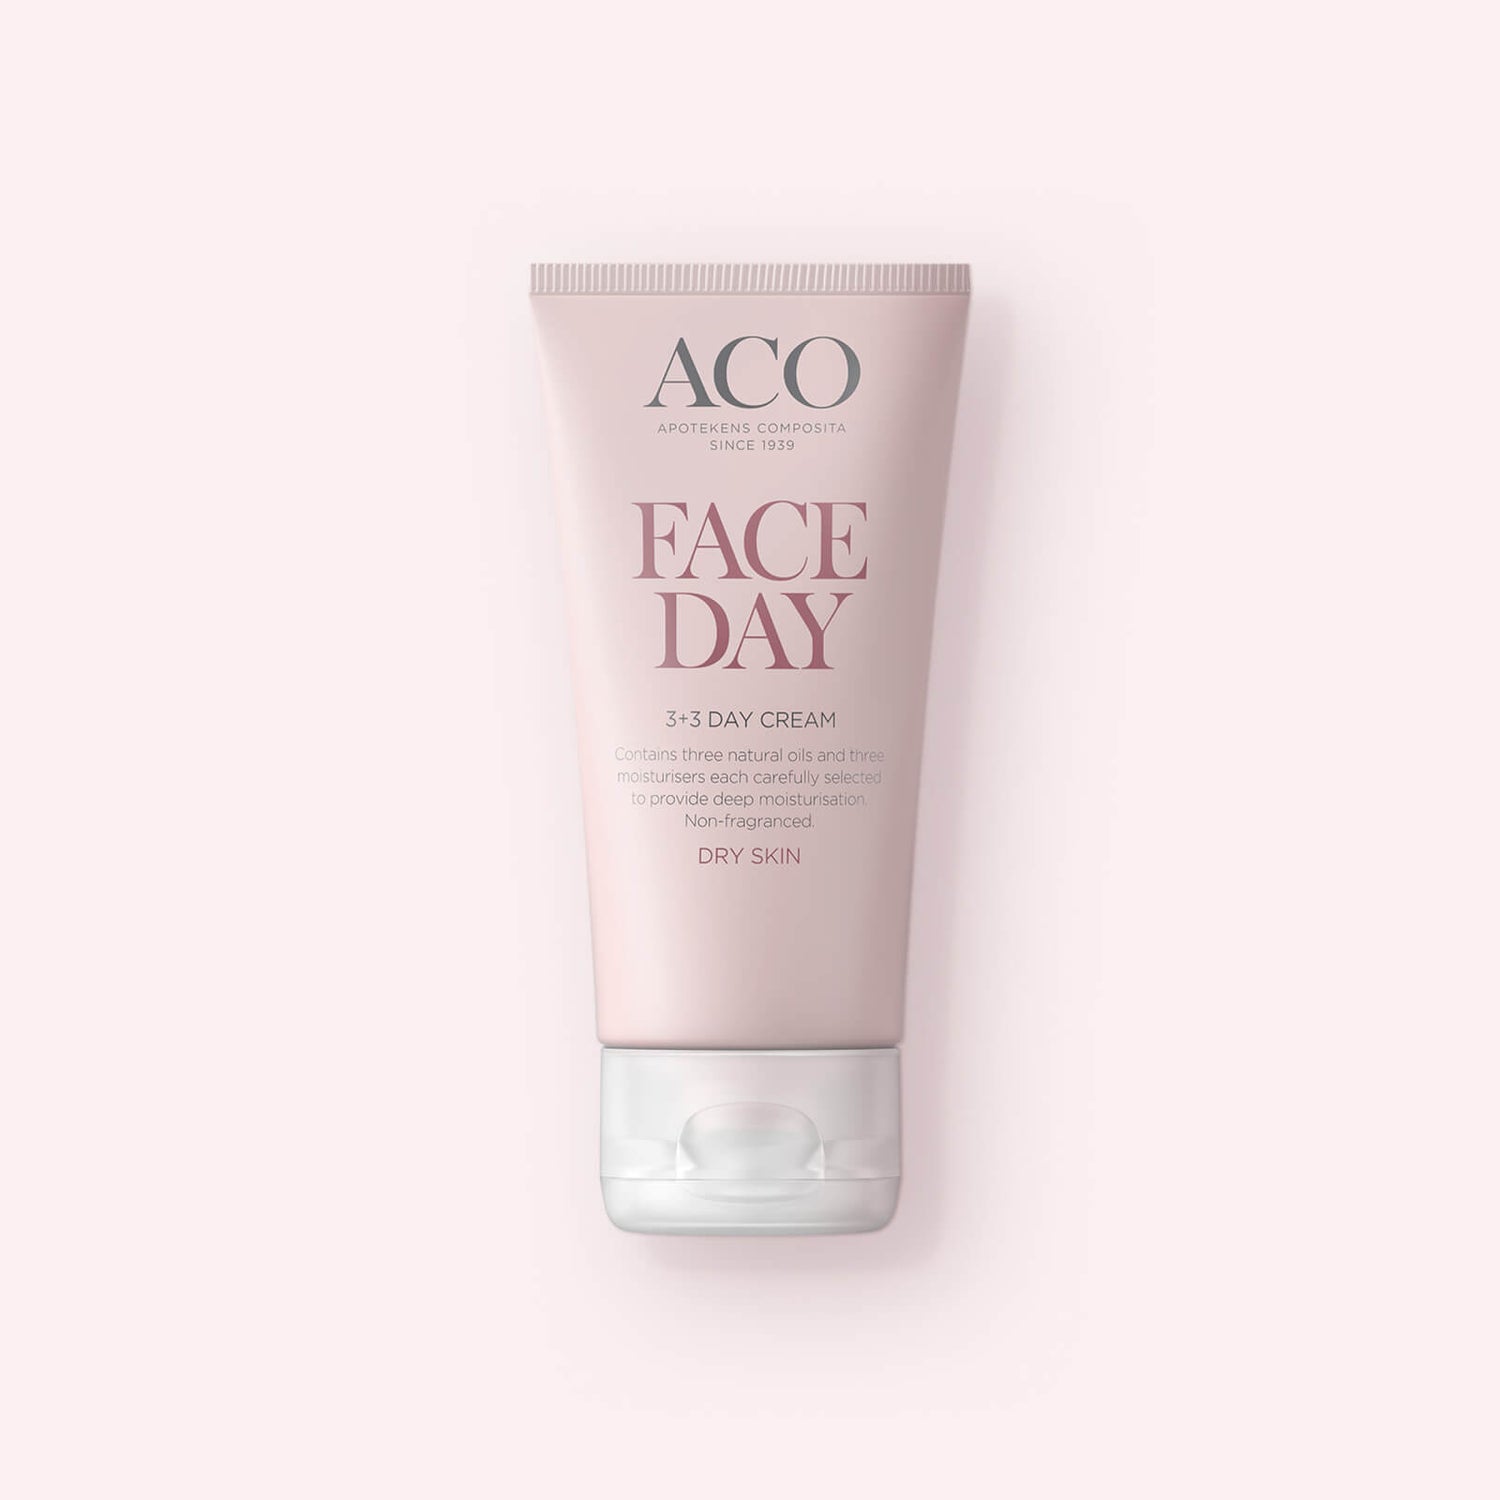 Face 3+3 Day Cream - 3+3 Tagescreme